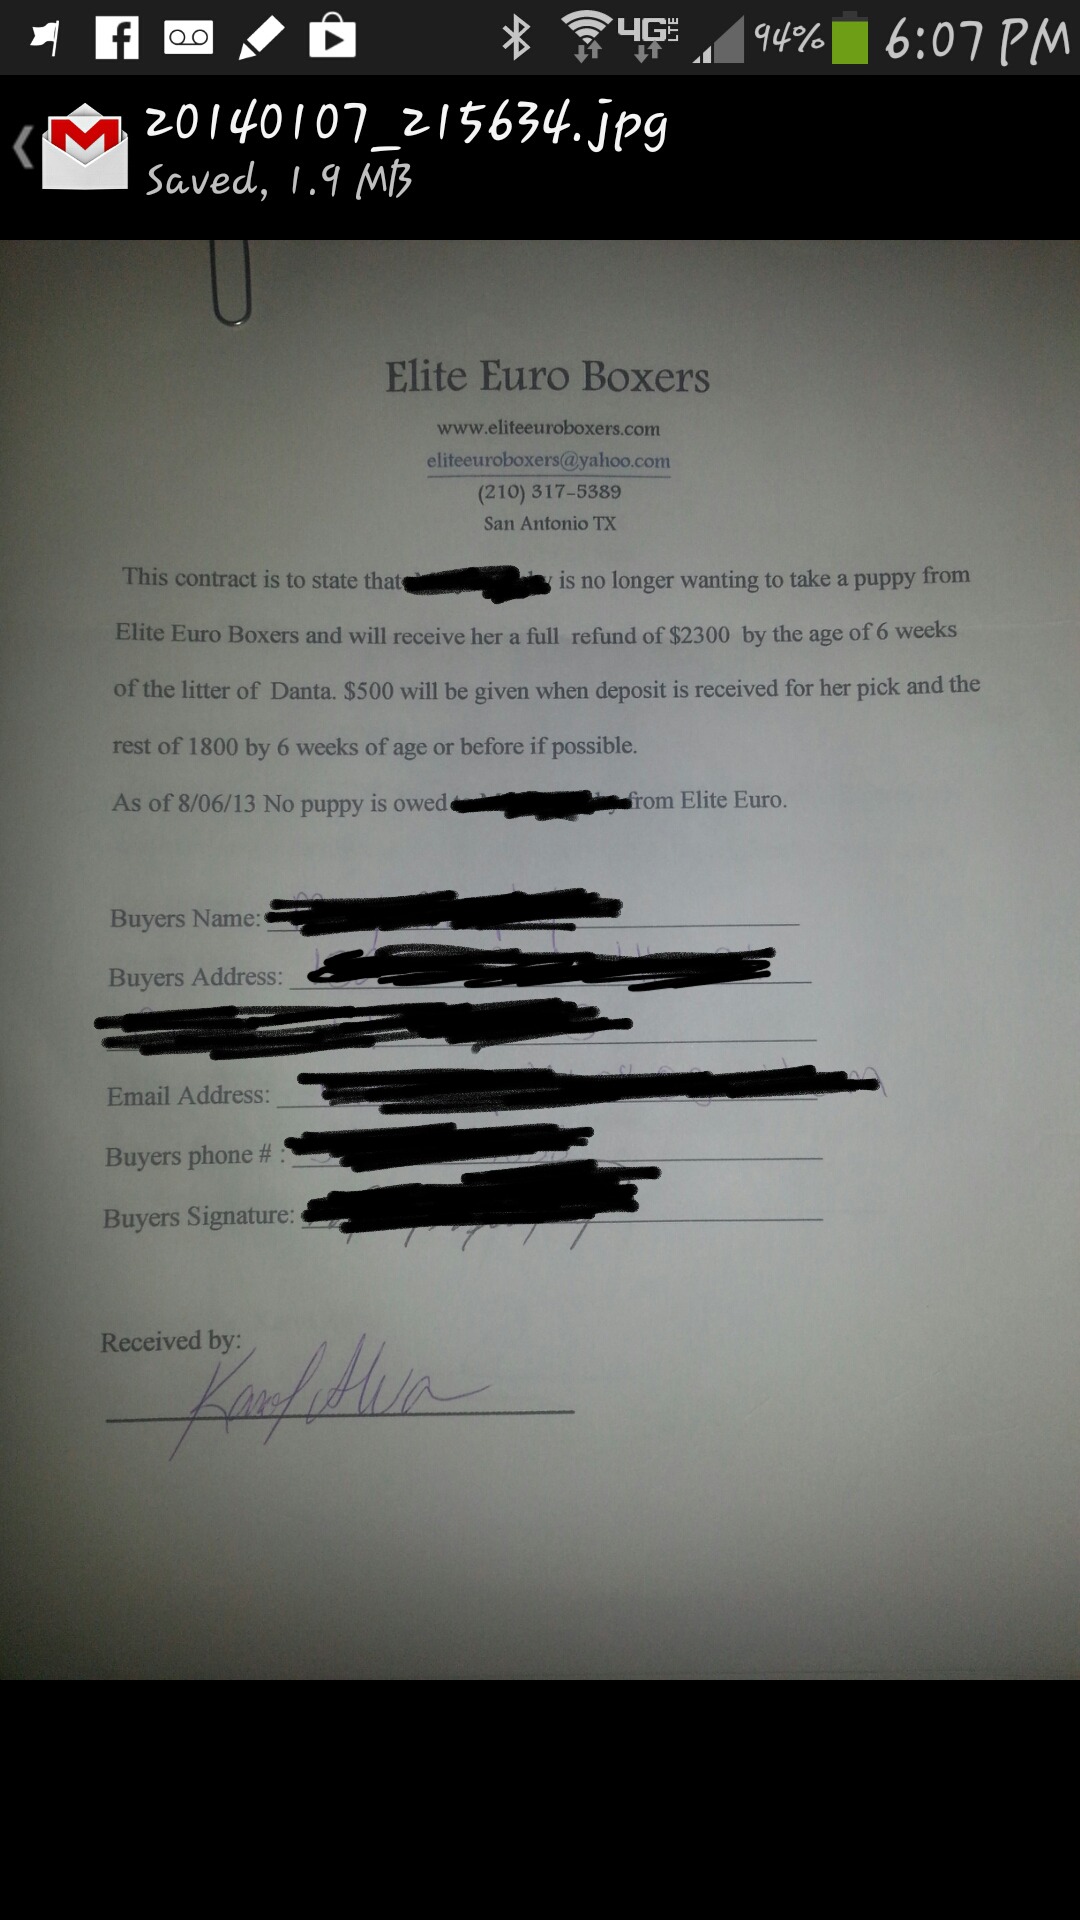 contract from Aug 2013